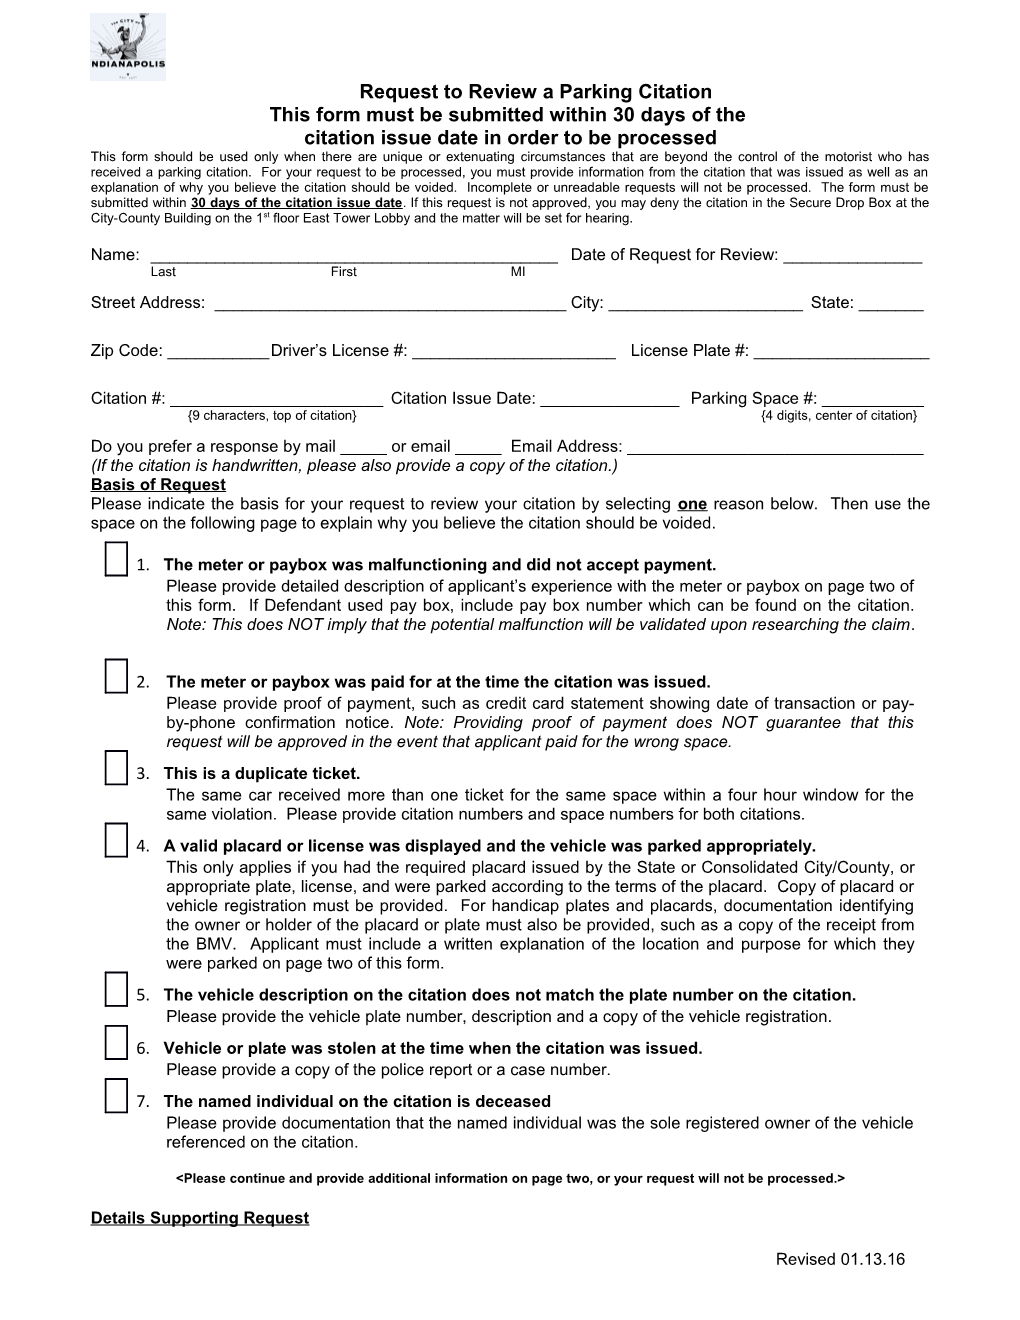 This Form Must Be Submitted Within 30 Days of The